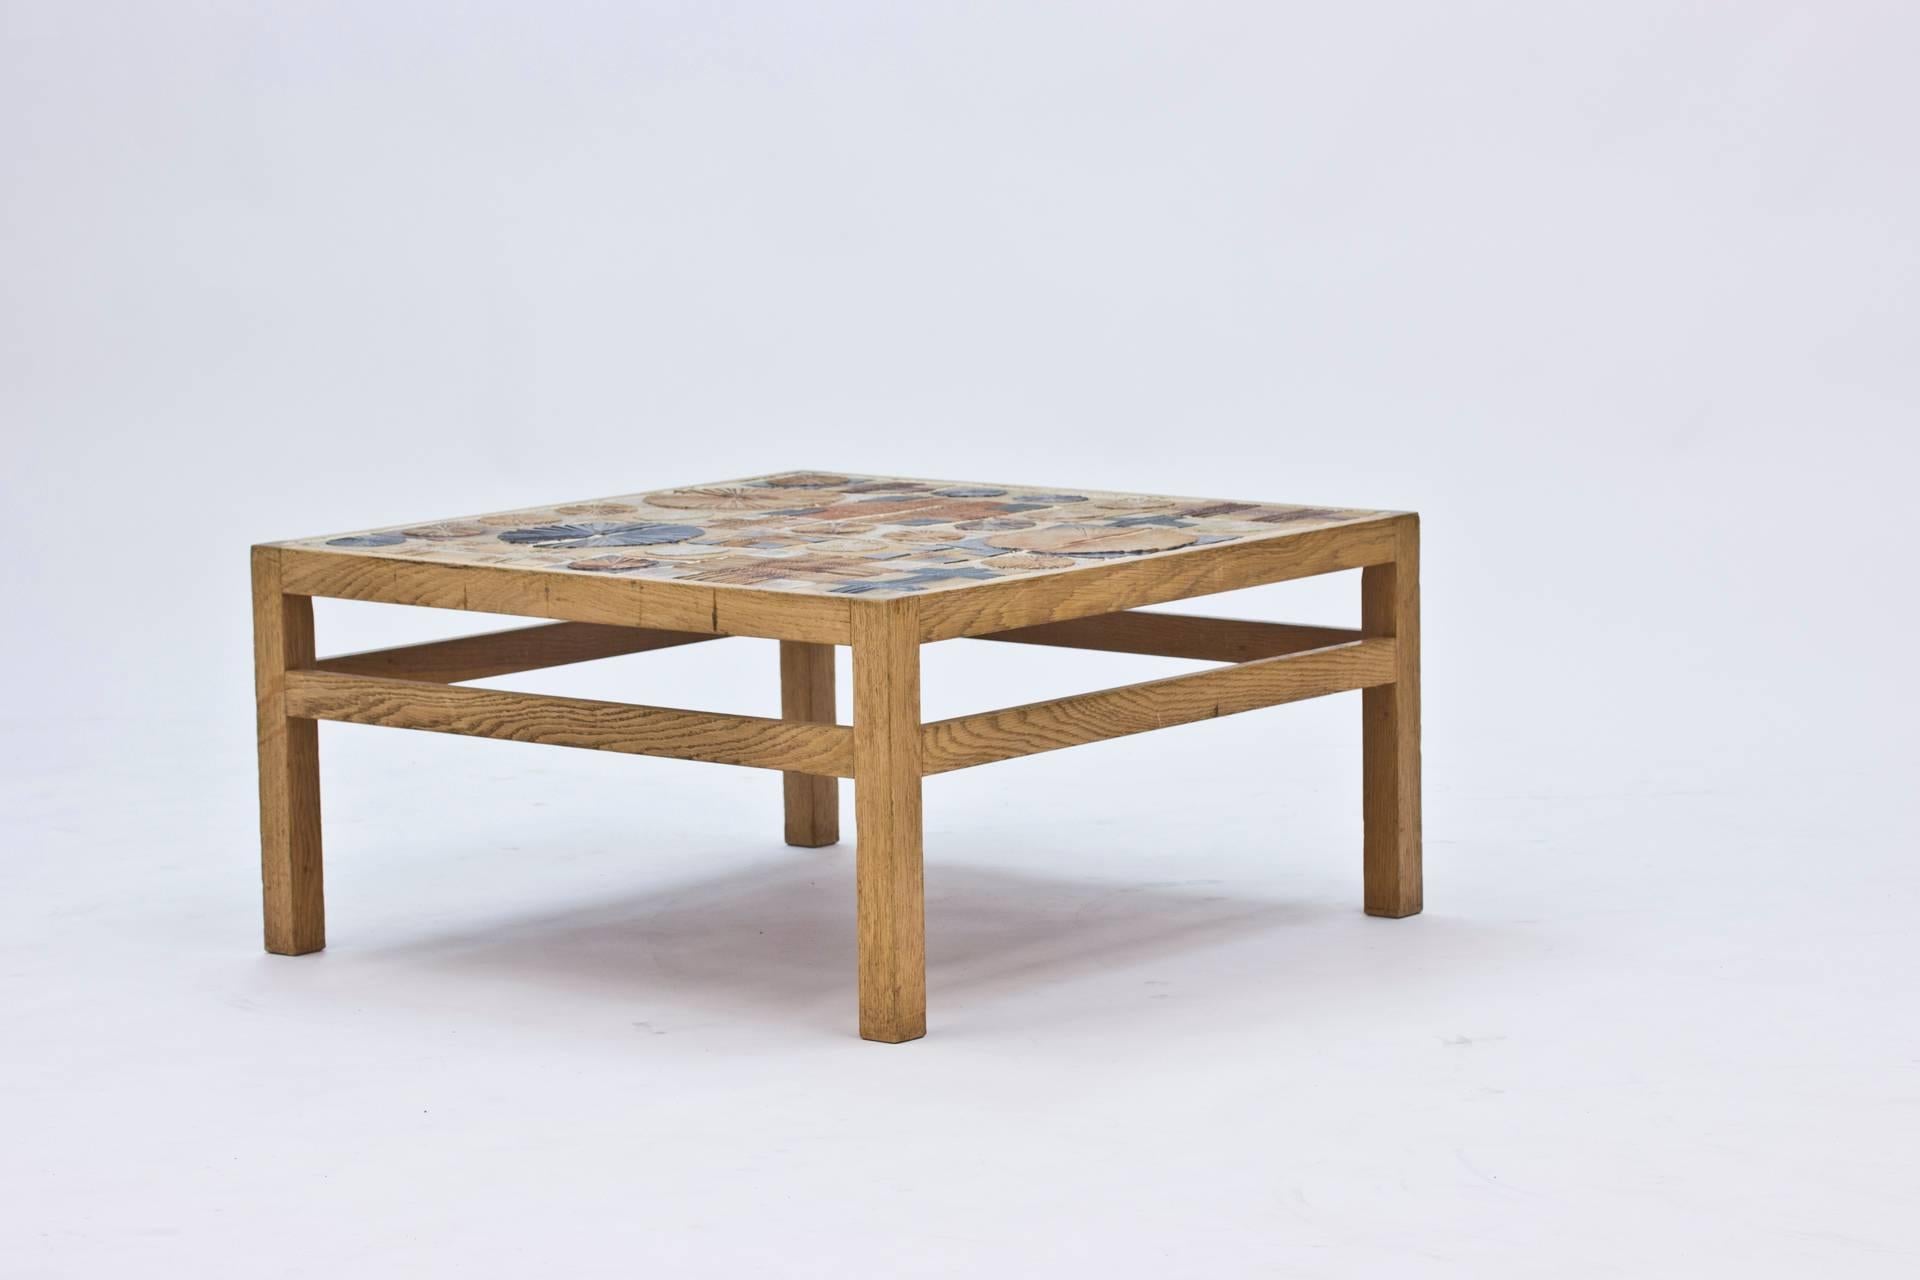 This table is the result of a collaboration between furniture designer Eric Wørtz and the artist Tue Poulsen. The blonde oak and the ceramic tiles creates a well balanced and amazing looking piece.